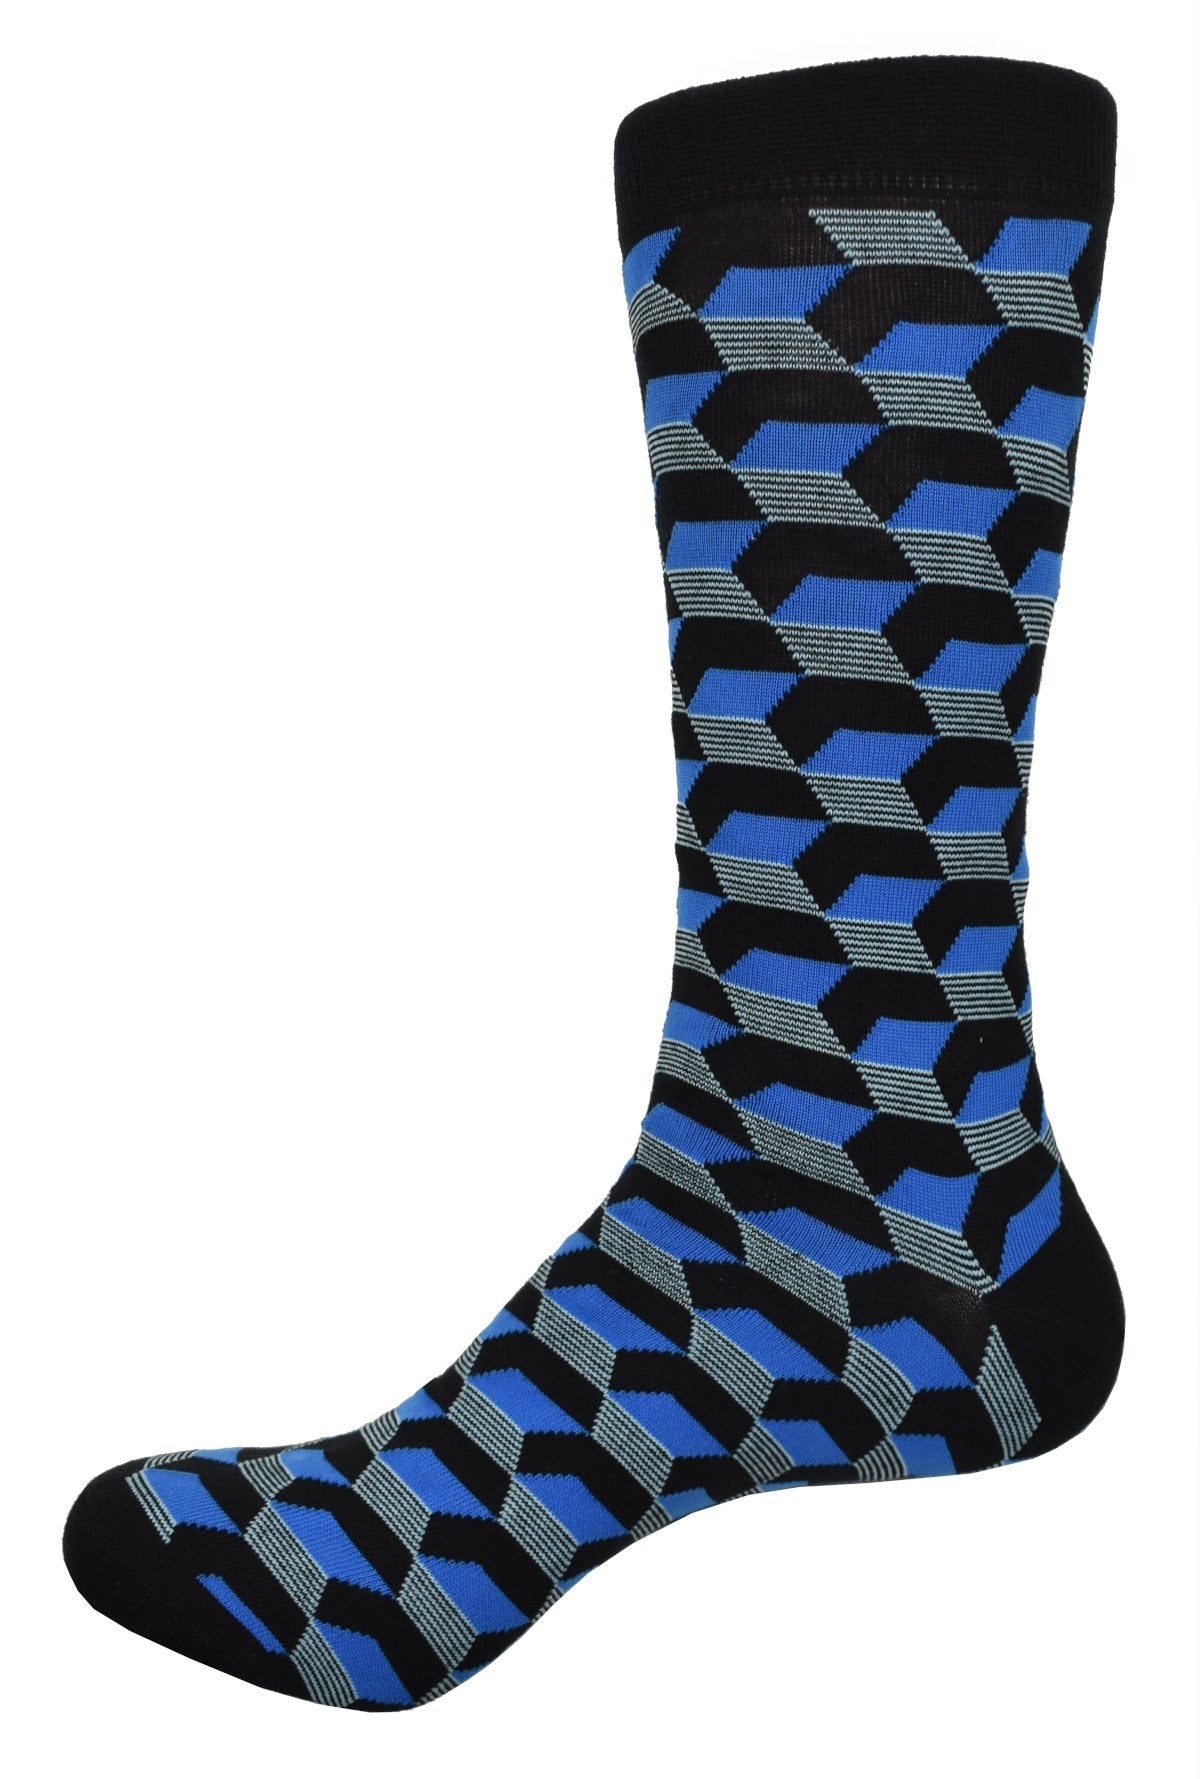 Elevate your sock game with ZV1575BB Black Blue Dimensions Socks. Made with fine mercerized cotton, these socks feature a cool geometric pattern in black, royal, and silver accents. Perfect for pairing with jeans or pants, these socks will add a touch of sophistication to any outfit.